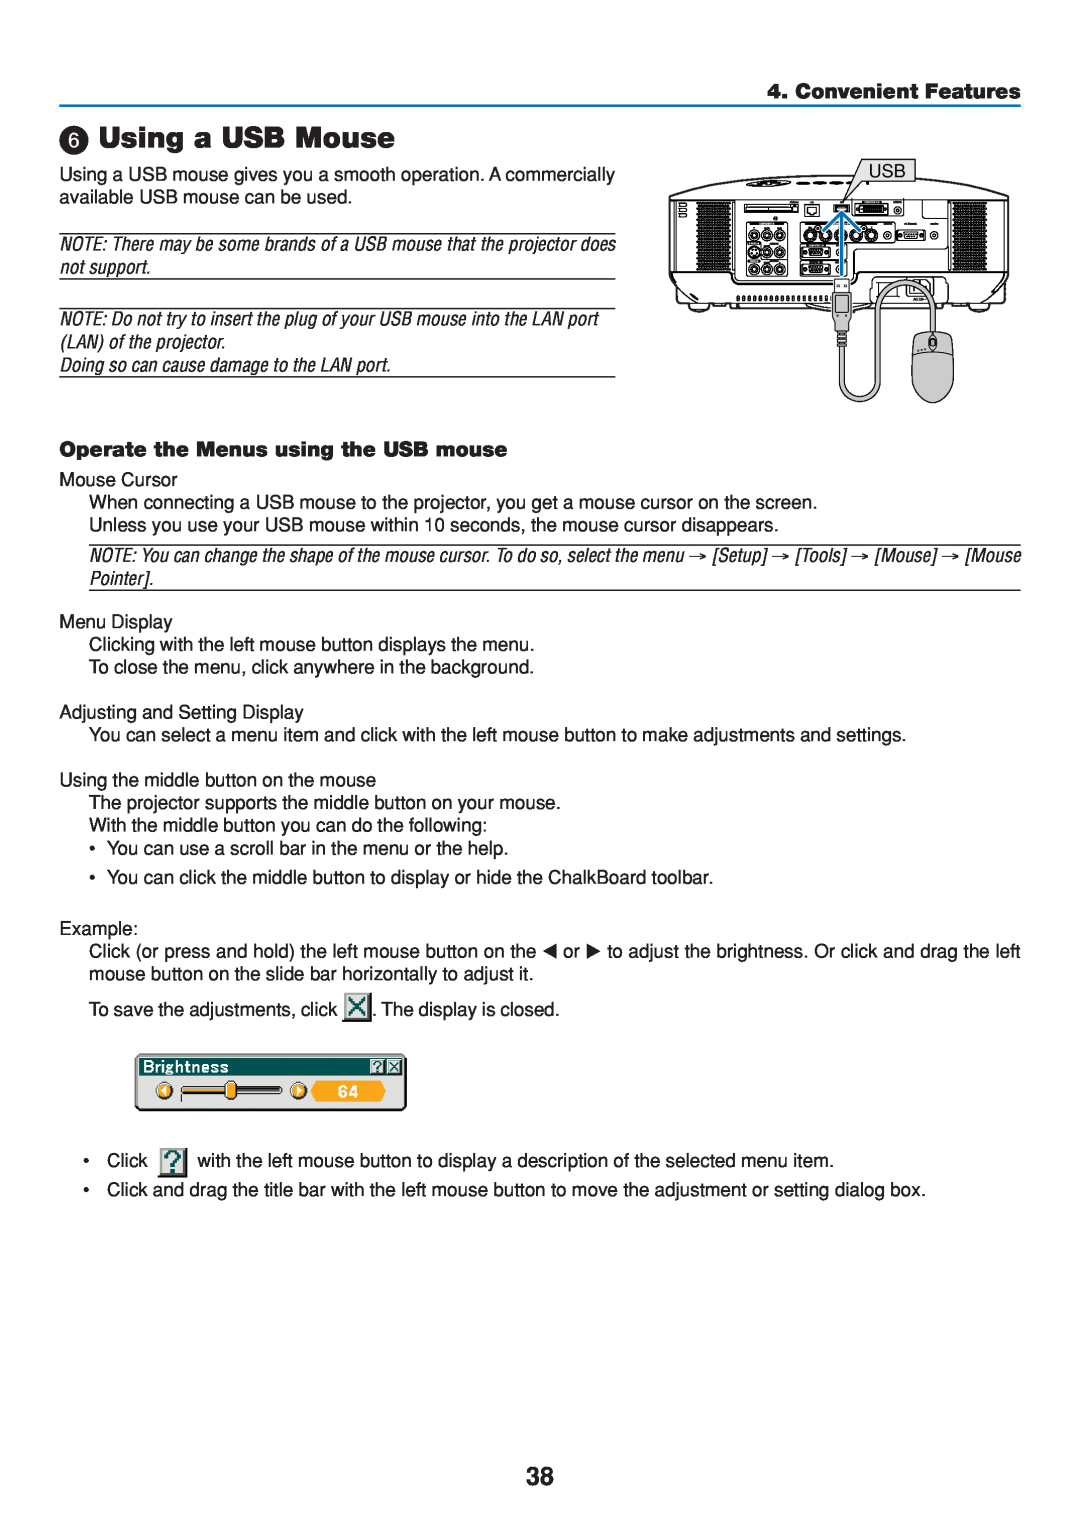 Dukane 8808 user manual Using a USB Mouse, Operate the Menus using the USB mouse, Convenient Features 